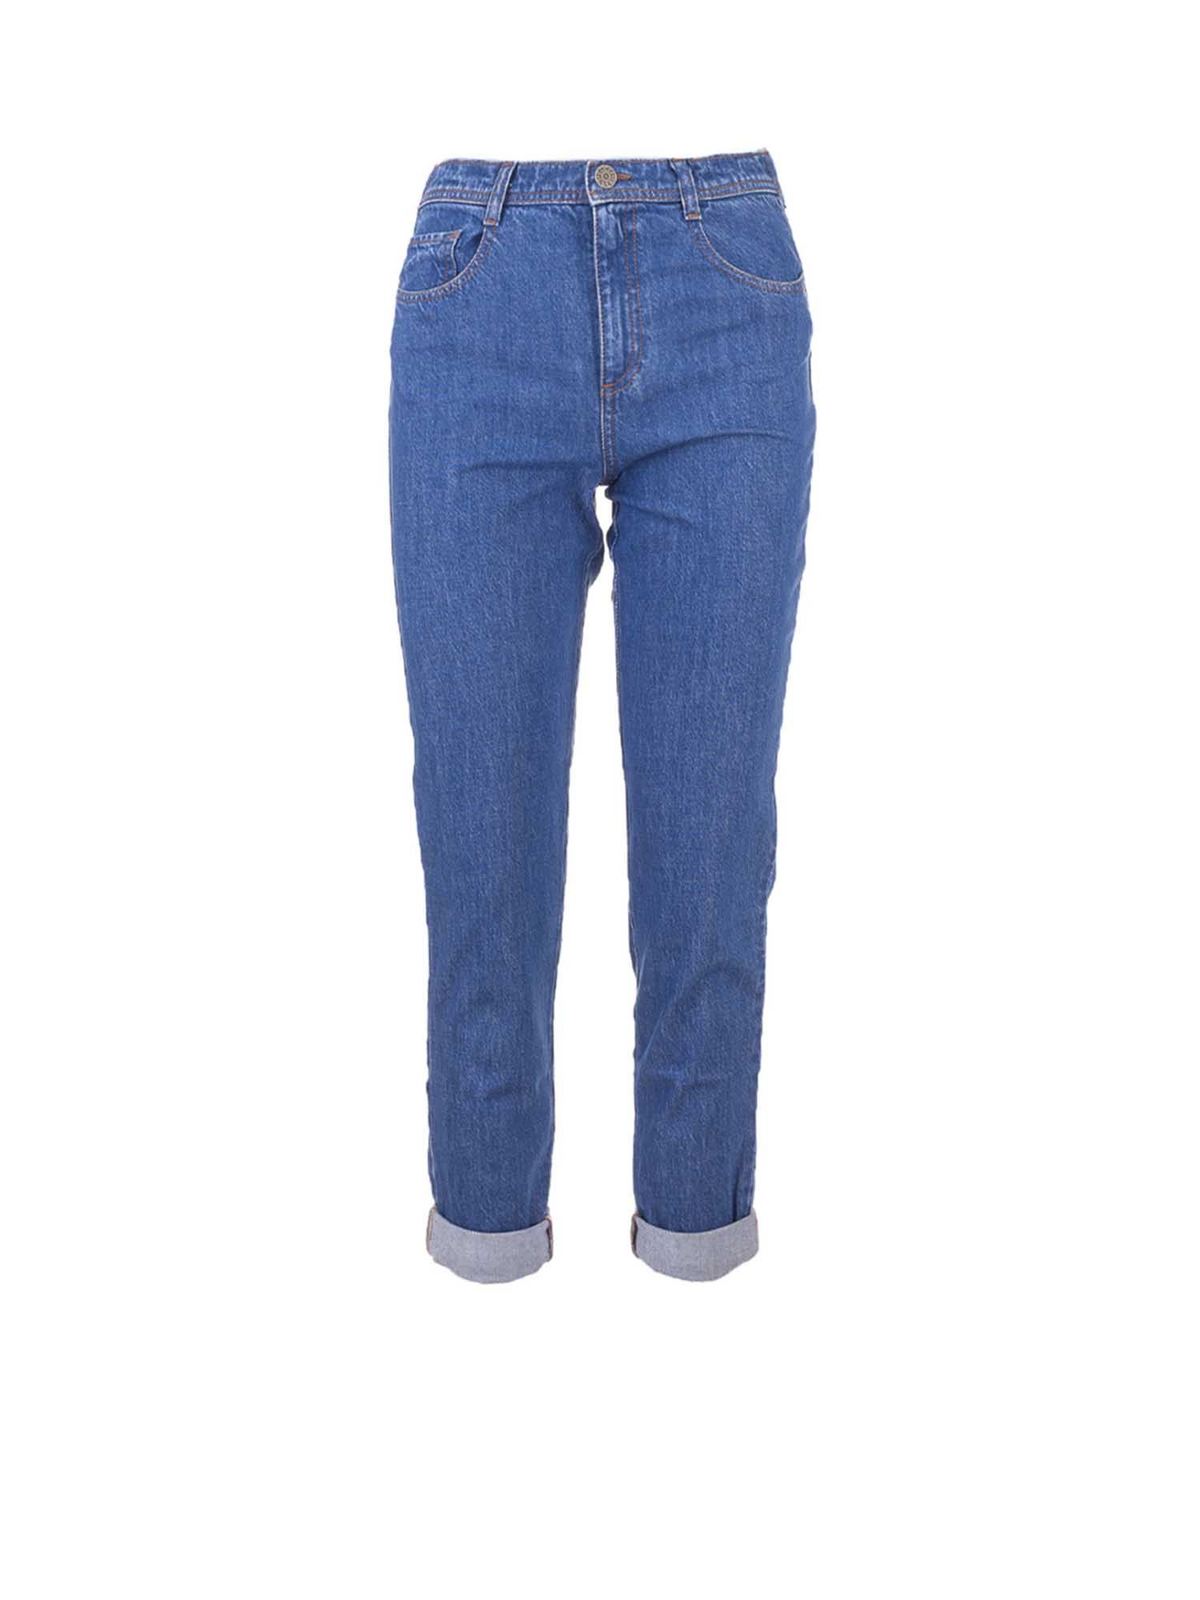 GUCCI BUTTERFLY JEANS IN BLUE BY GUCCI KIDS